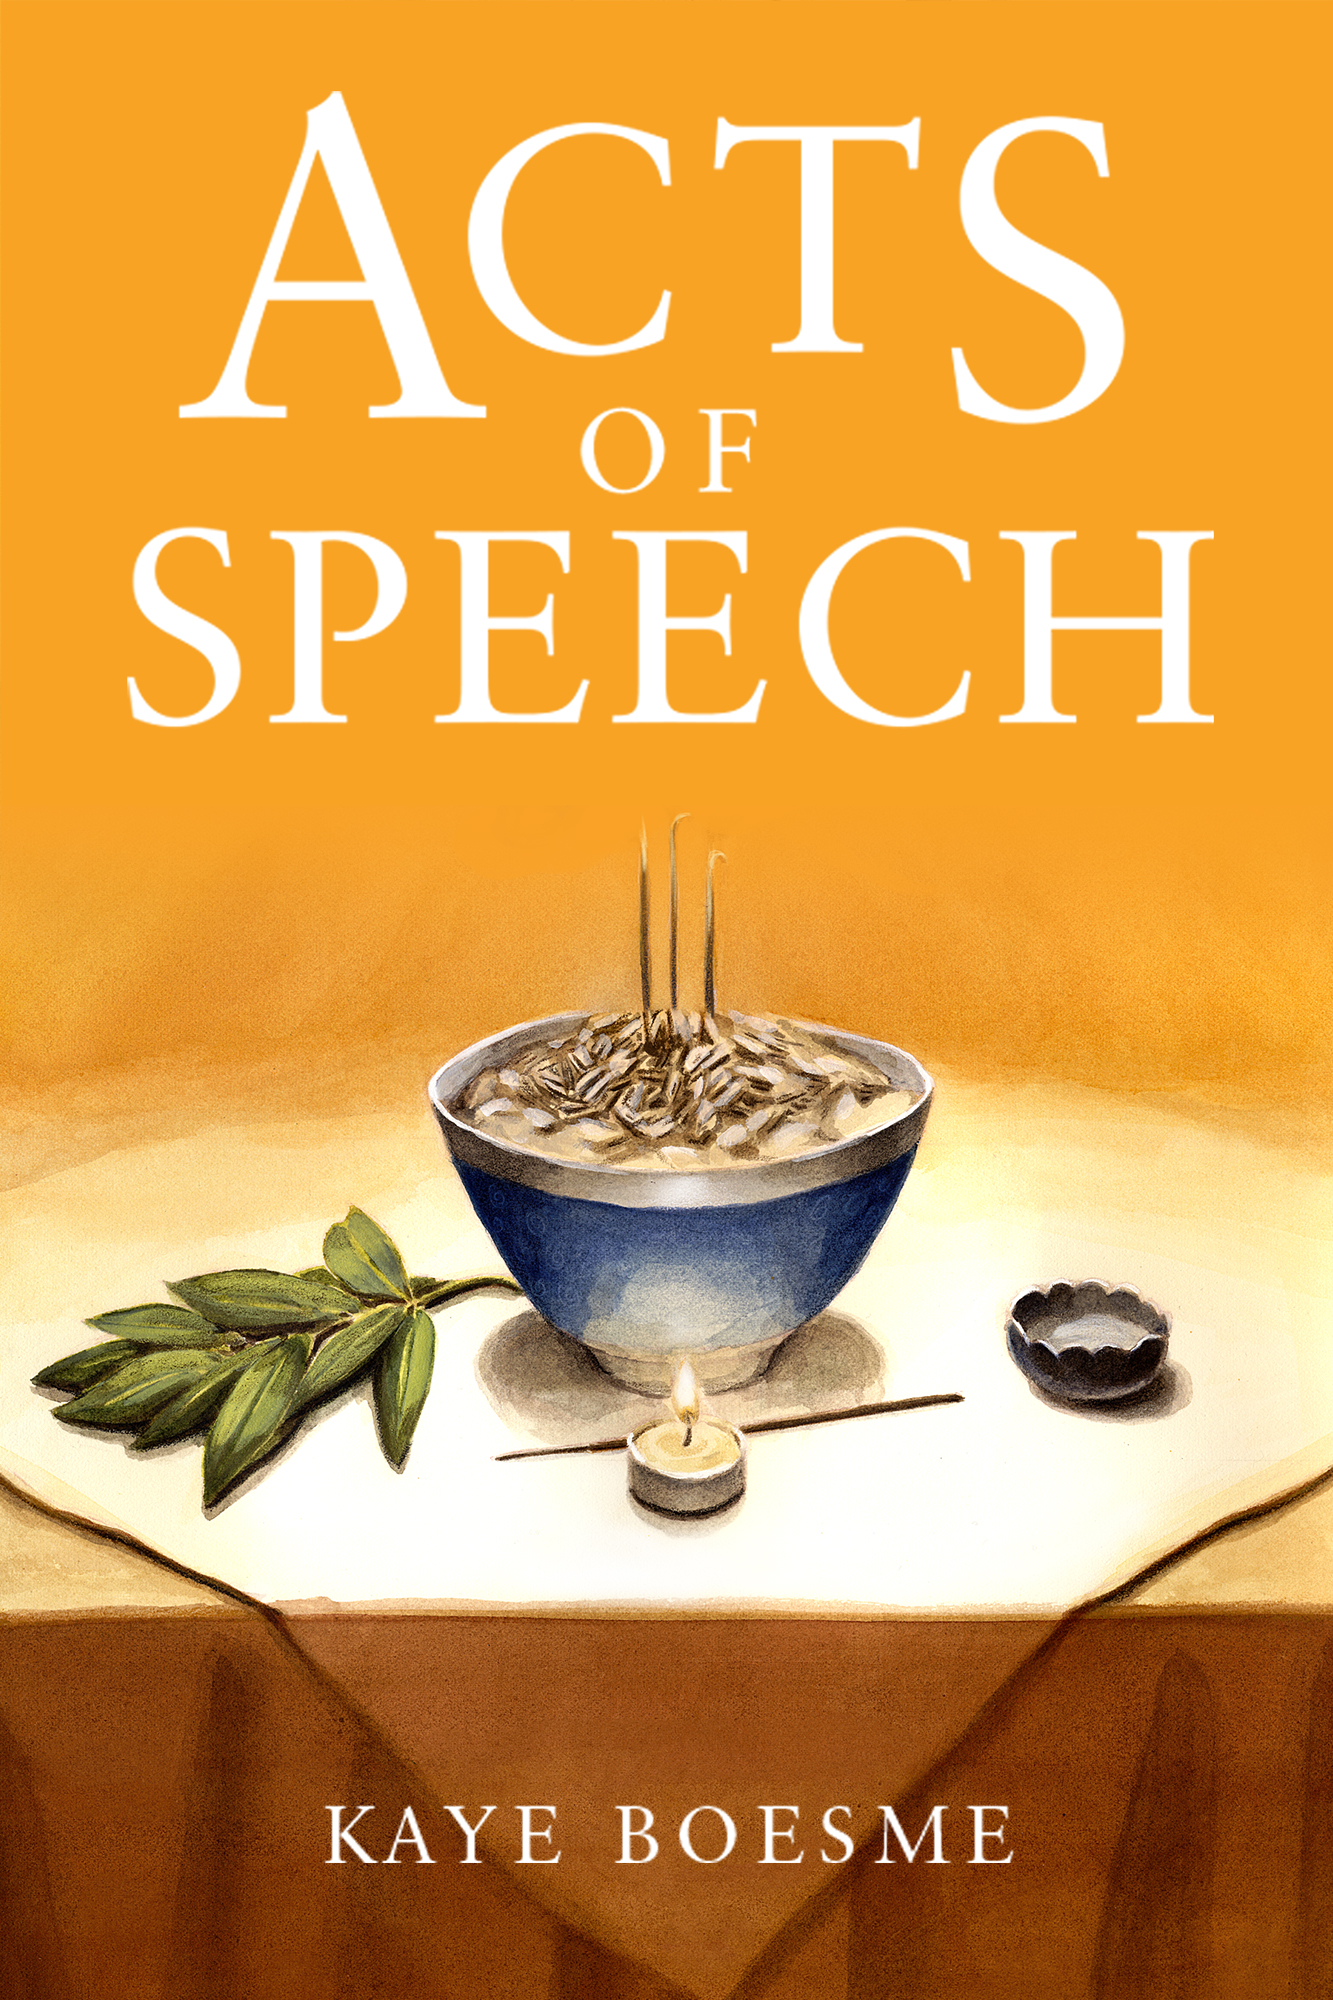 Acts of Speech book cover